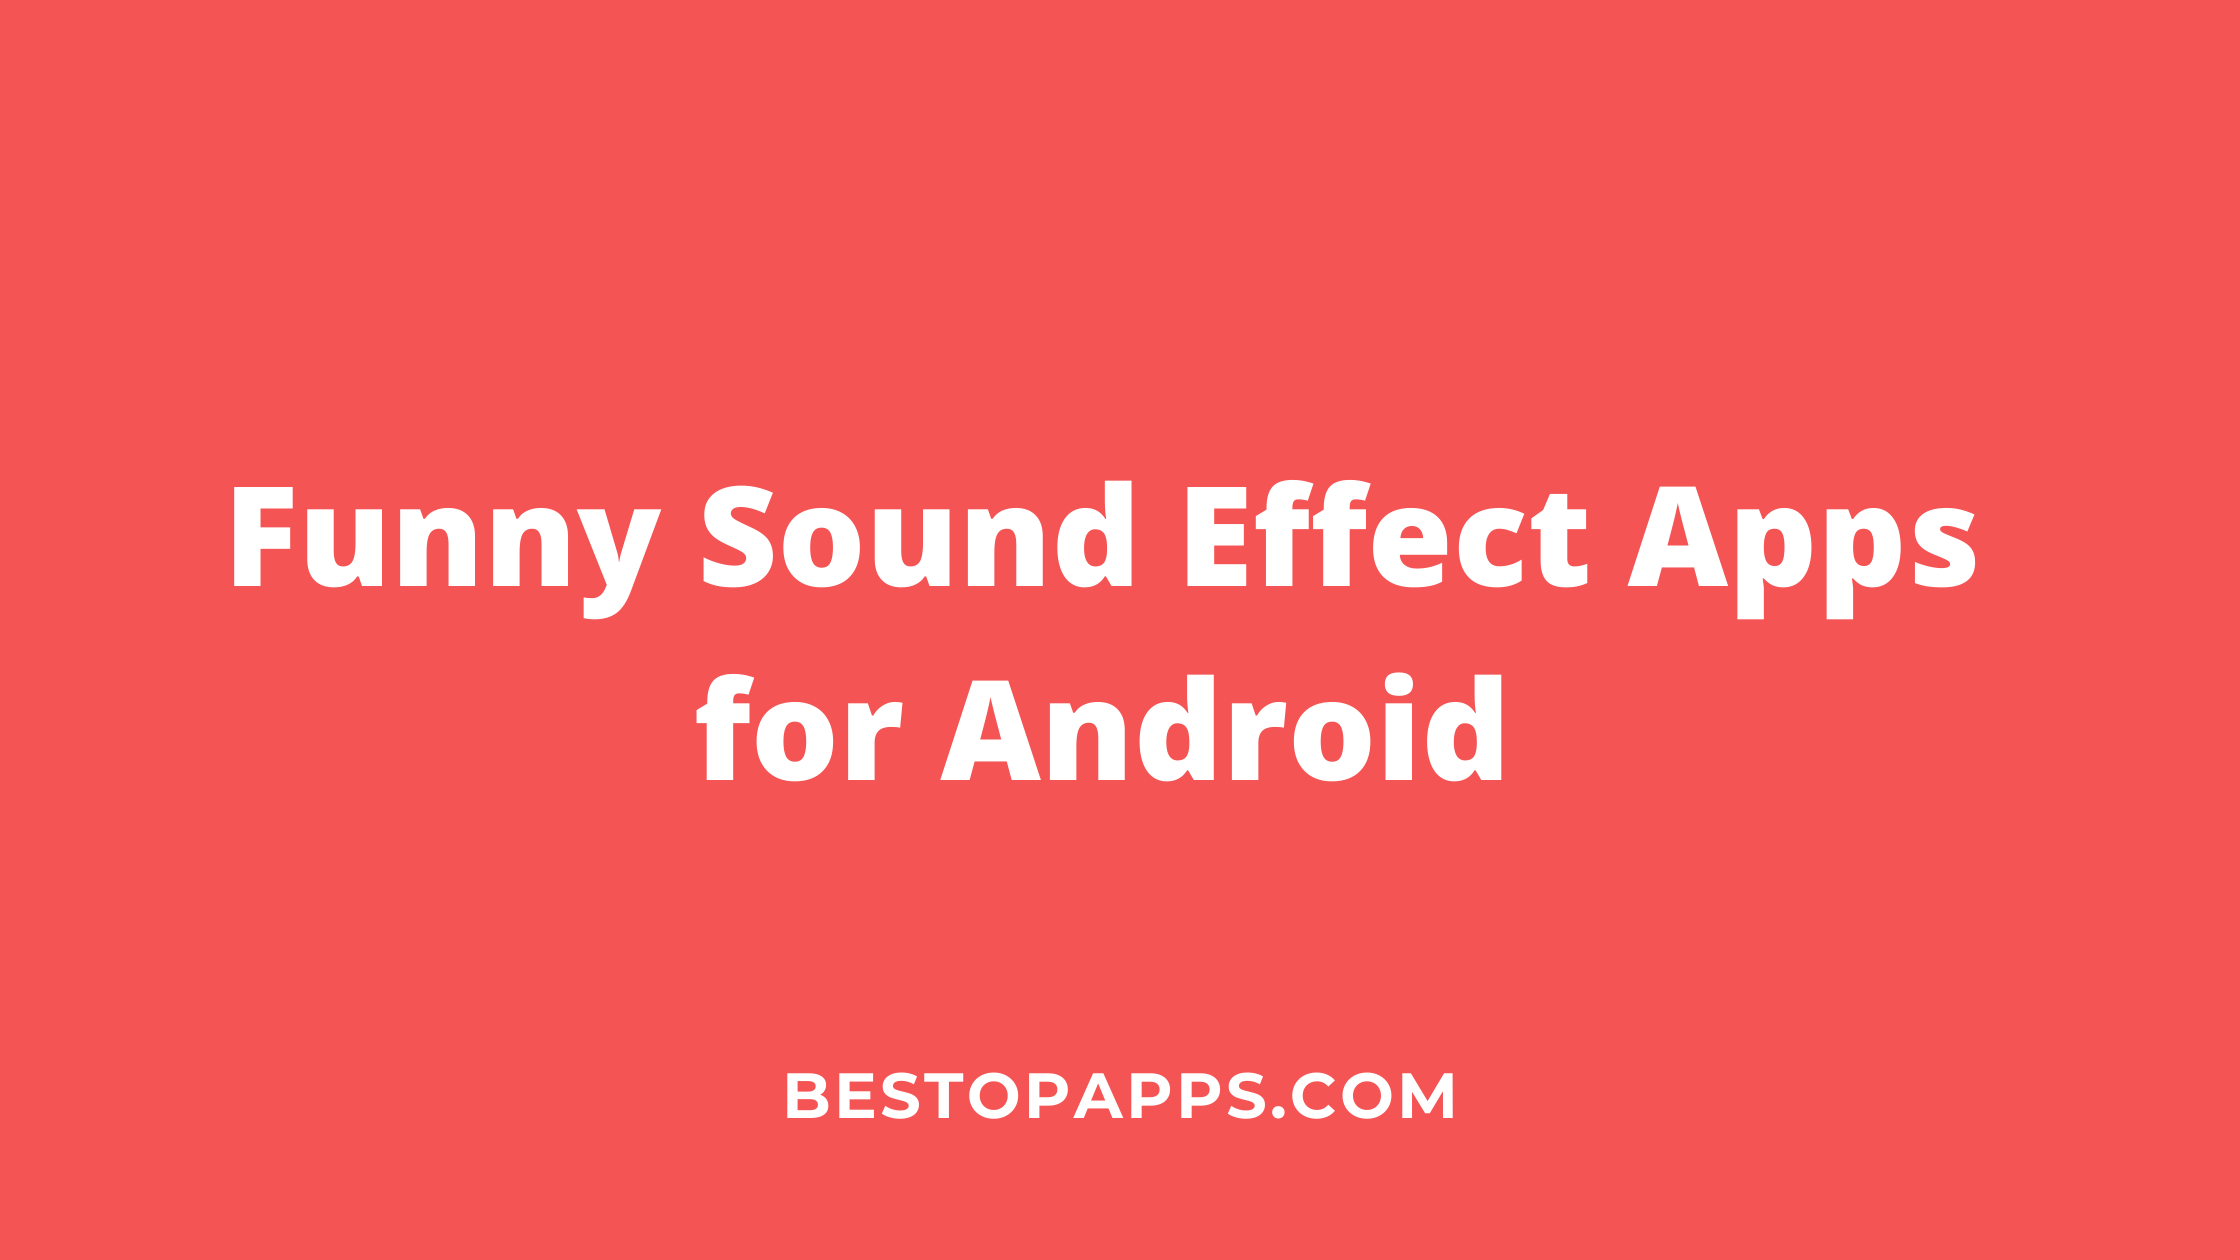 Funny Sound Effect Apps for Android